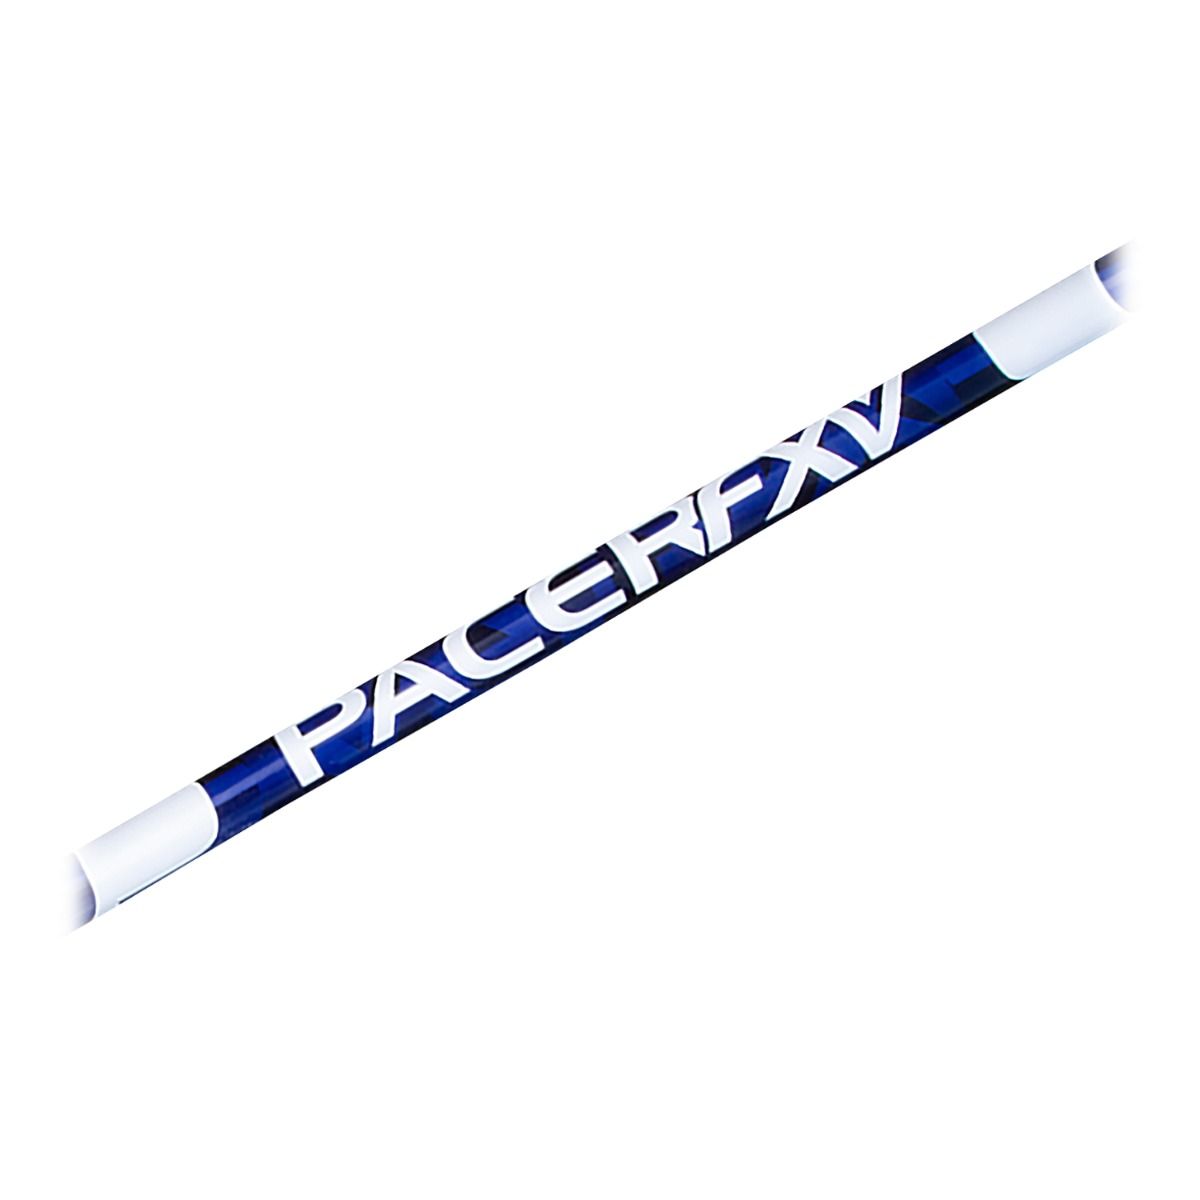 Gill PacerFXV 11' 6" Vaulting Pole